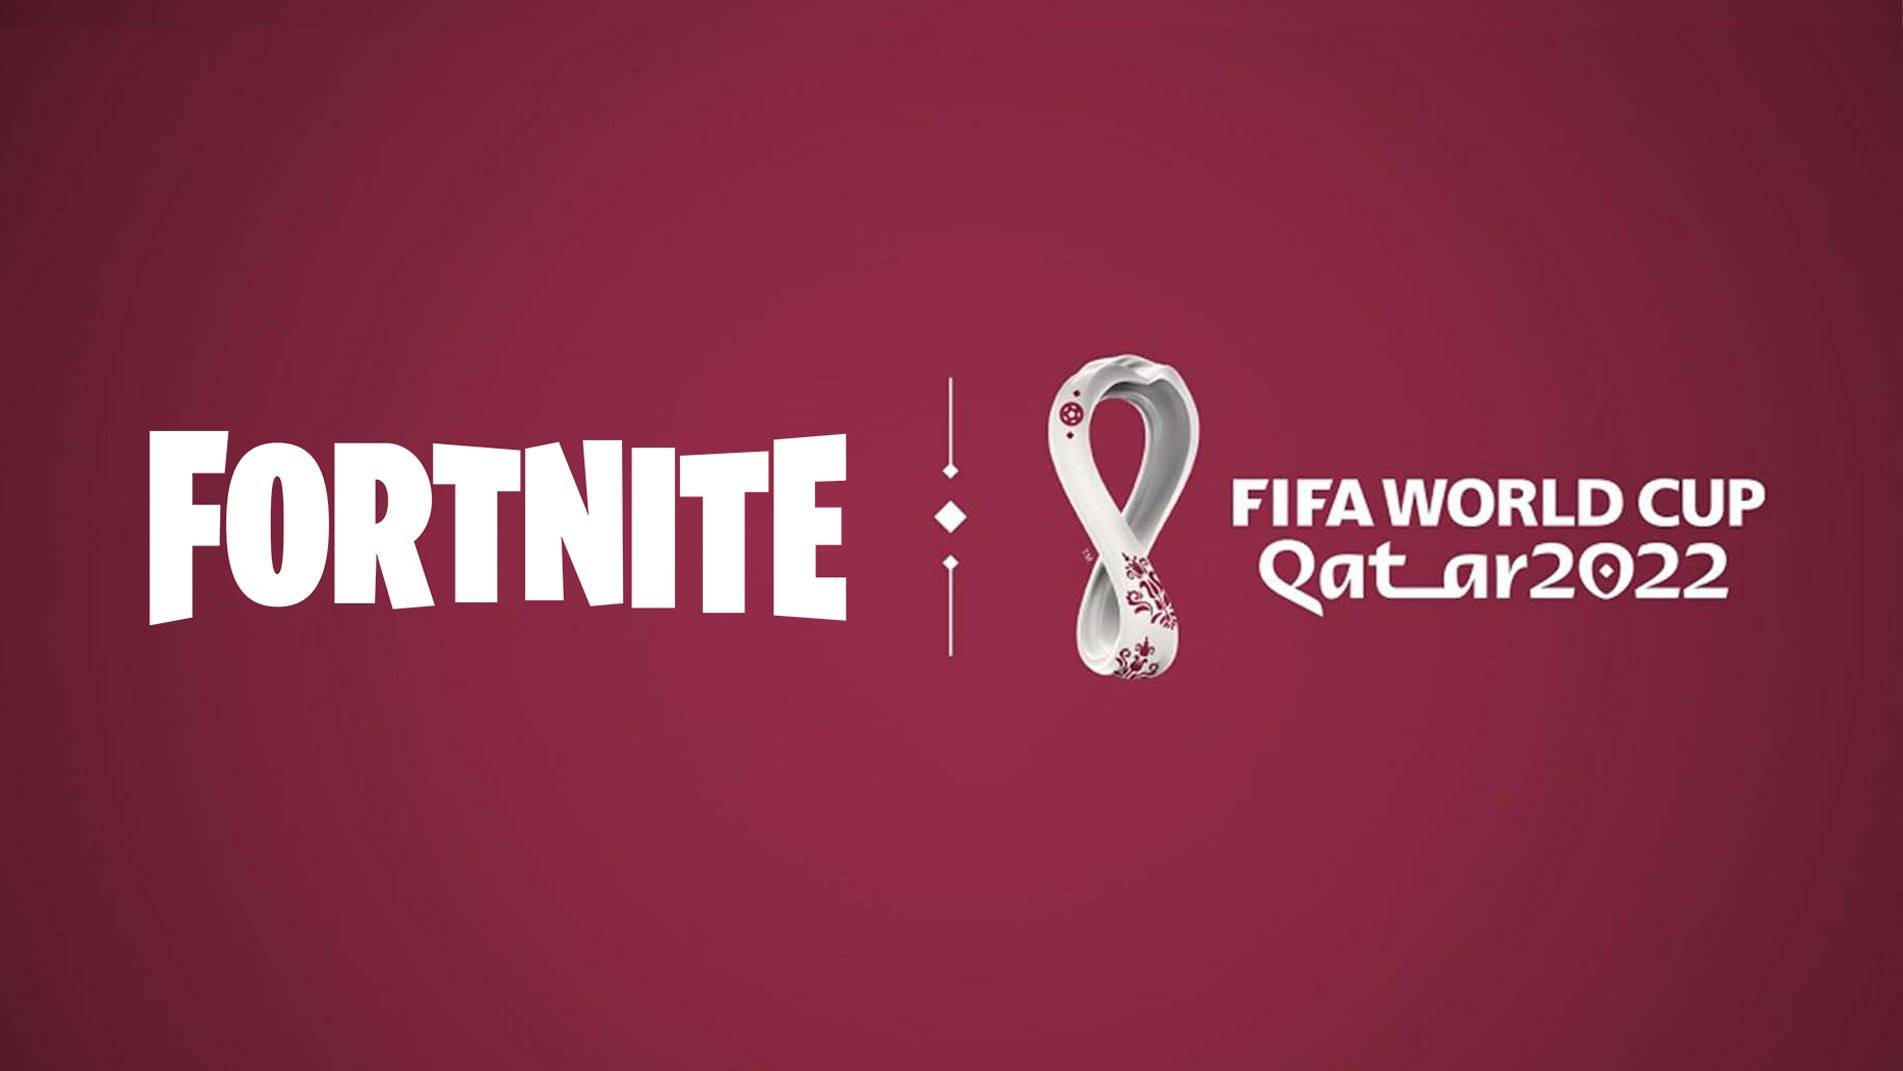 Fortnite x FIFA World Cup: Challenges, XP, Rewards and More